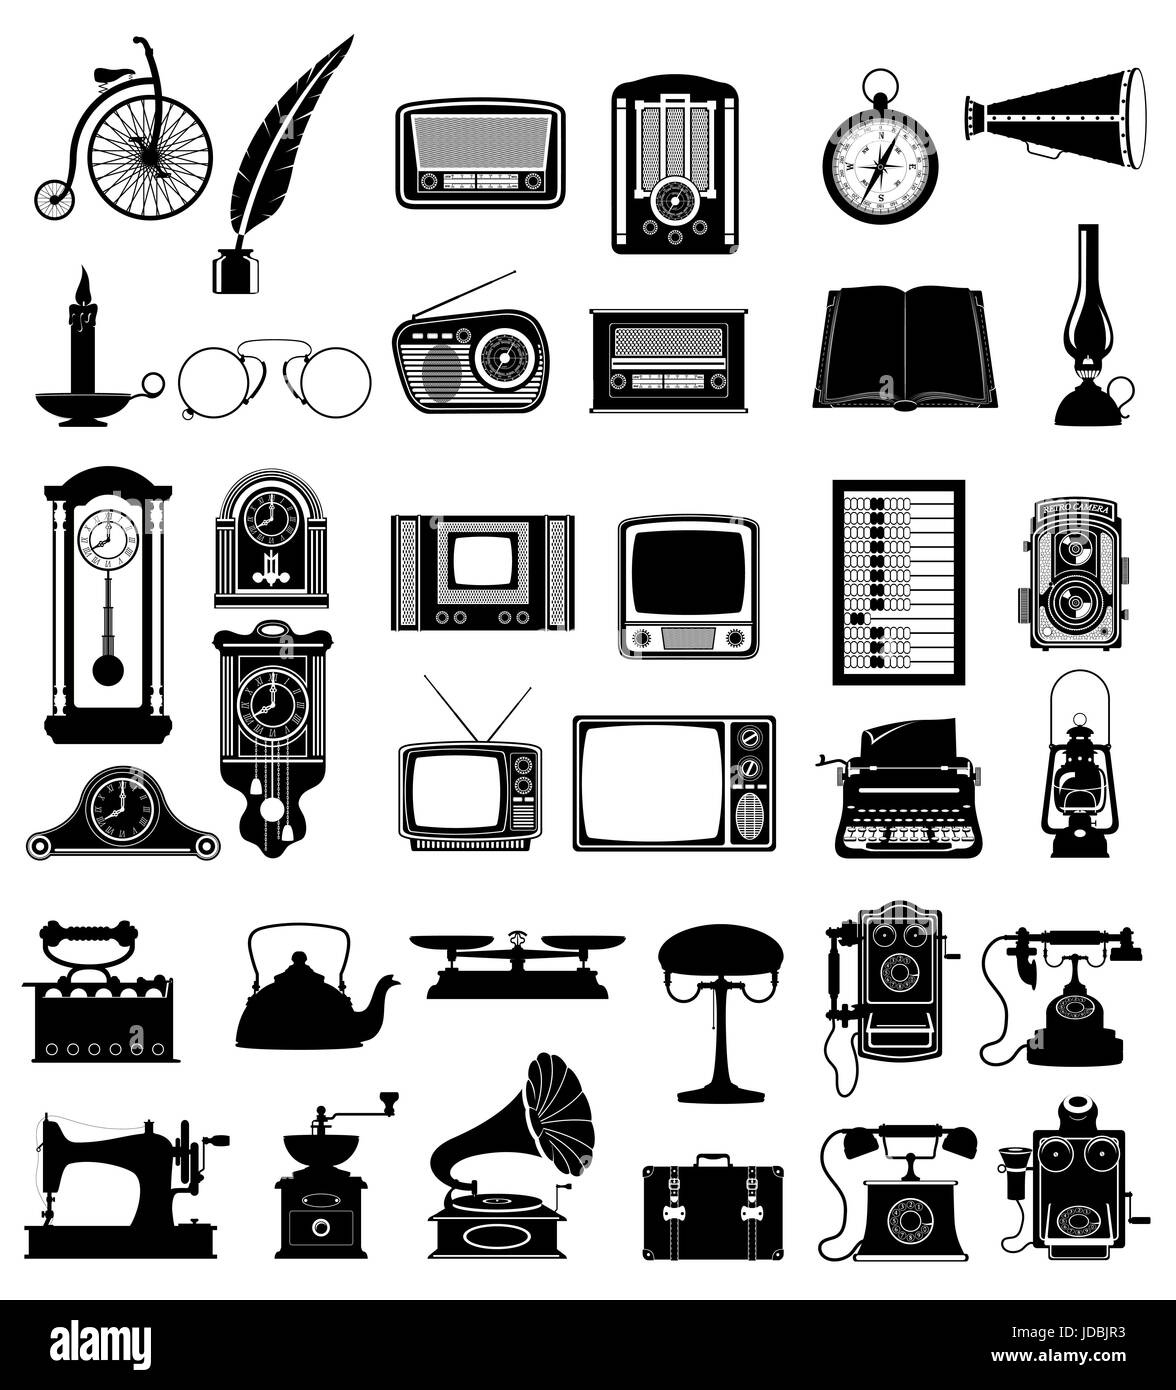 big set of much objects retro old vintage icons stock vector illustration isolated on white background Stock Photo